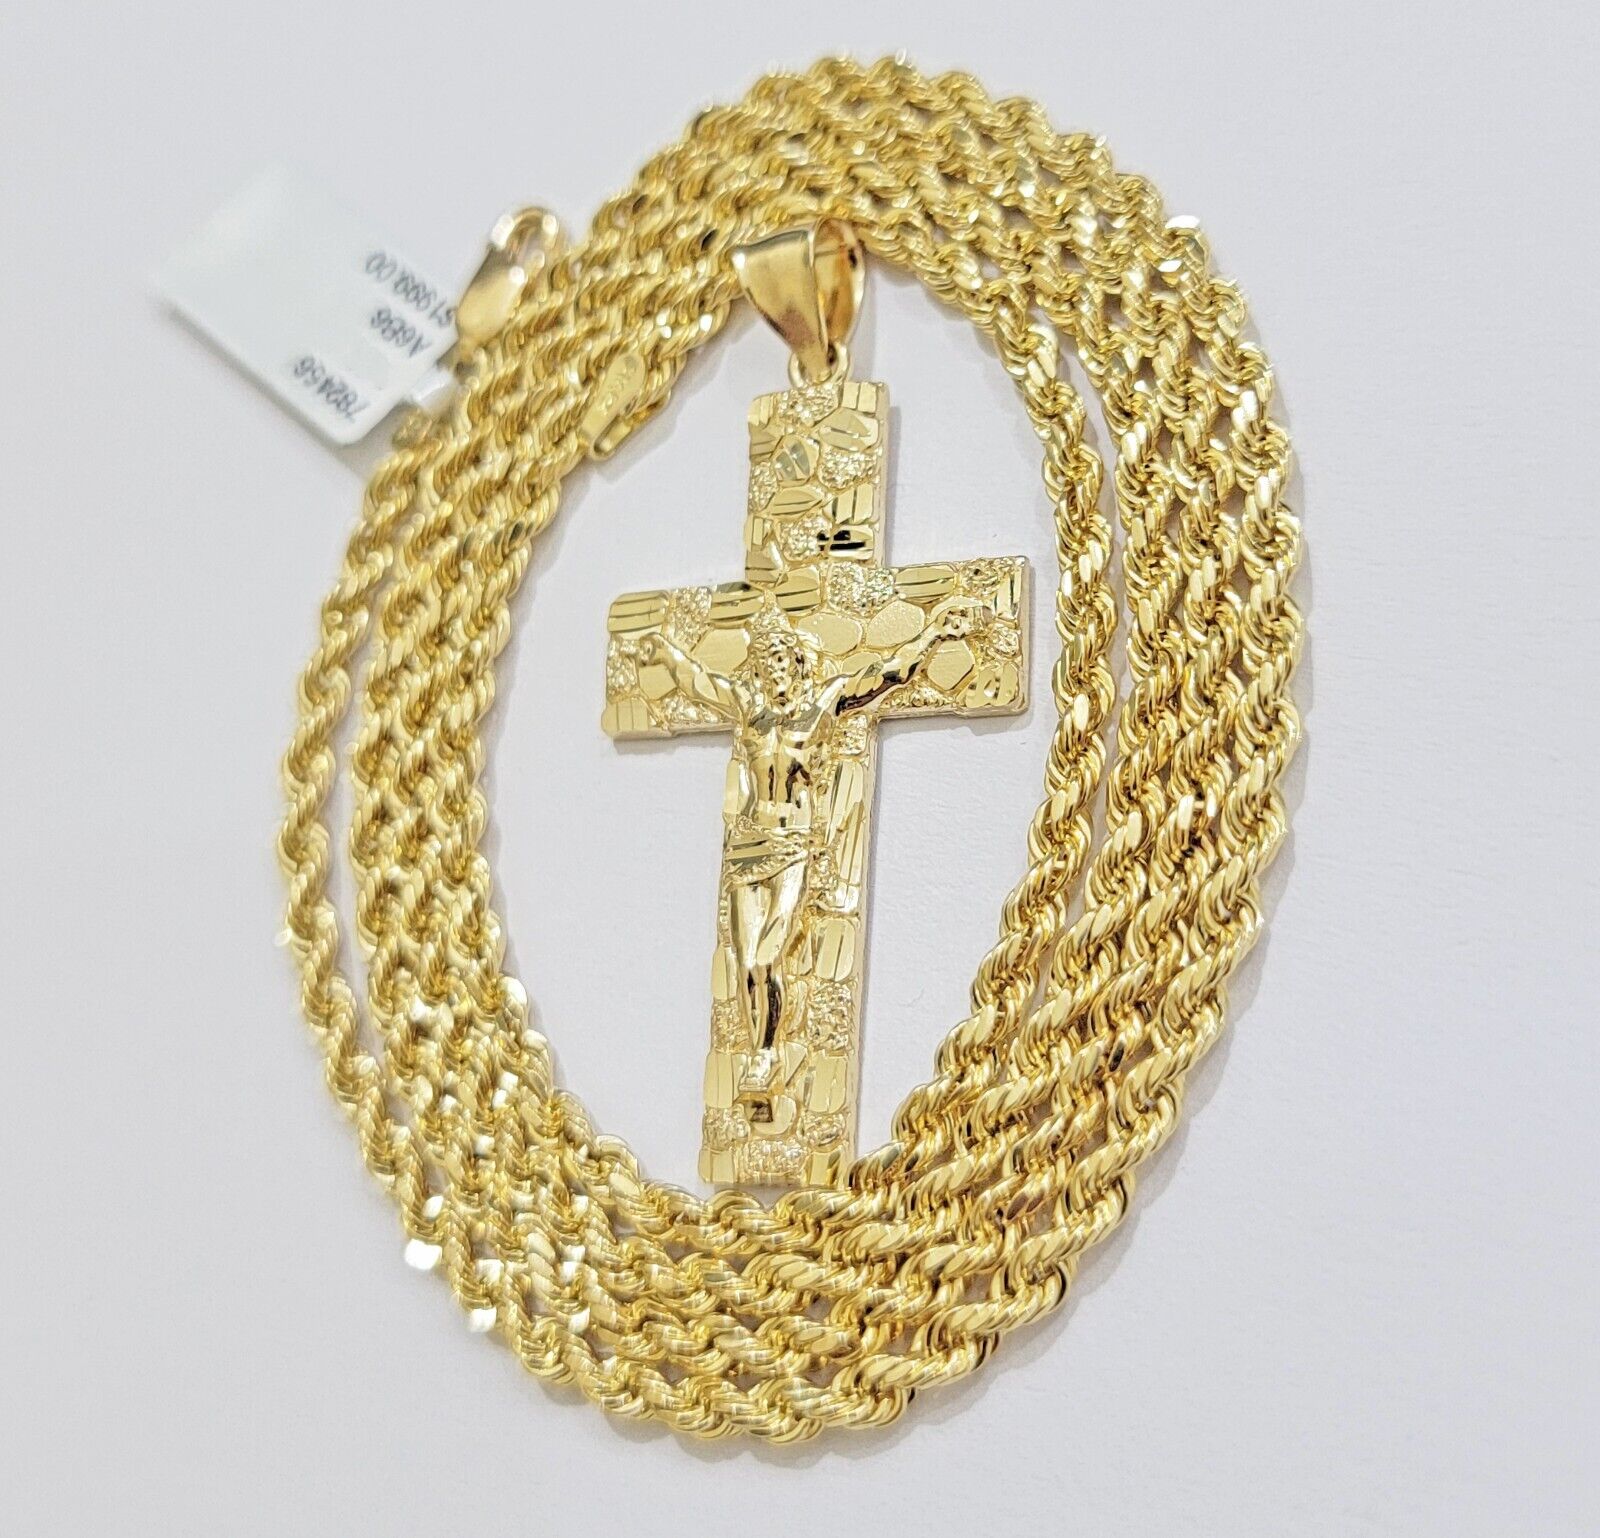 10k Yellow Gold Rope Chain Nugget Cross Charm Set 20 Inch necklace pendant, REAL